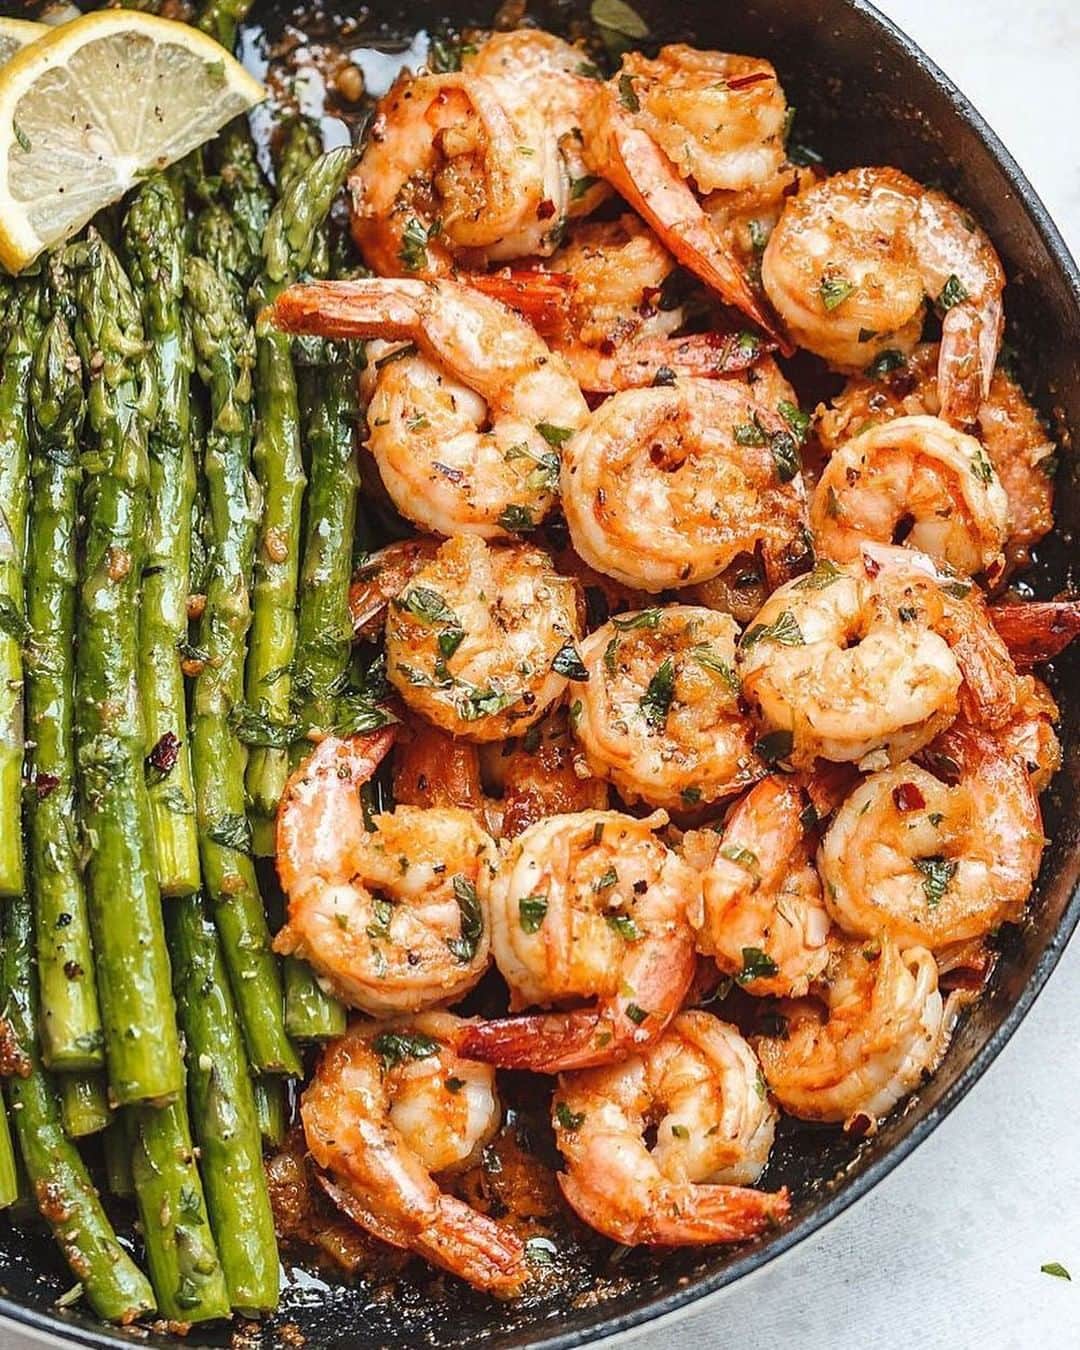 Flavorgod Seasoningsさんのインスタグラム写真 - (Flavorgod SeasoningsInstagram)「KETO Lemon Garlic Butter Shrimp and Asparagus 🍤﻿ -﻿ KETO friendly Seasonings on Sale here ⬇️﻿ Click the link in the bio -> @flavorgod﻿ www.flavorgod.com﻿ -﻿ By @eatwell101﻿ .﻿ Lemon Garlic Butter Shrimp with Asparagus – So much flavor and so easy to throw together, this shrimp dinner is a winner! Flavorful, juicy shrimp team up with fork-tender asparagus in this easy one-pan meal.﻿ .﻿ Full recipe with directions, as well as many more like it, can be found on @eatwell101’s site. Link is in their bio!﻿ .﻿ Serves: 2-3﻿ INGREDIENTS:﻿ 1.5 lbs (700g) medium raw shrimp, peeled and deveined﻿ 1.5 (700g) asparagus (1 bunch) rinsed and trimmed﻿ 3 tablespoons butter﻿ 1 tablespoon olive oil﻿ 5 clove garlic, minced﻿ 1 teaspoon Italian seasoning﻿ 2 teaspoons onion powder﻿ Salt and fresh cracked pepper, to taste﻿ 1/4 cup (60ml) vegetable stock﻿ 1 tablespoon Sriracha (or any hot sauce you like)﻿ Crushed chili pepper flakes, optional﻿ Juice of 1/2 lemon﻿ Fresh chopped parsley or cilantro, for garnish﻿ -﻿ -﻿ #food #foodie #flavorgod #seasonings #glutenfree #mealprep  #keto #paleo #vegan #kosher #breakfast #lunch #dinner #yummy #delicious #foodporn」6月16日 10時00分 - flavorgod